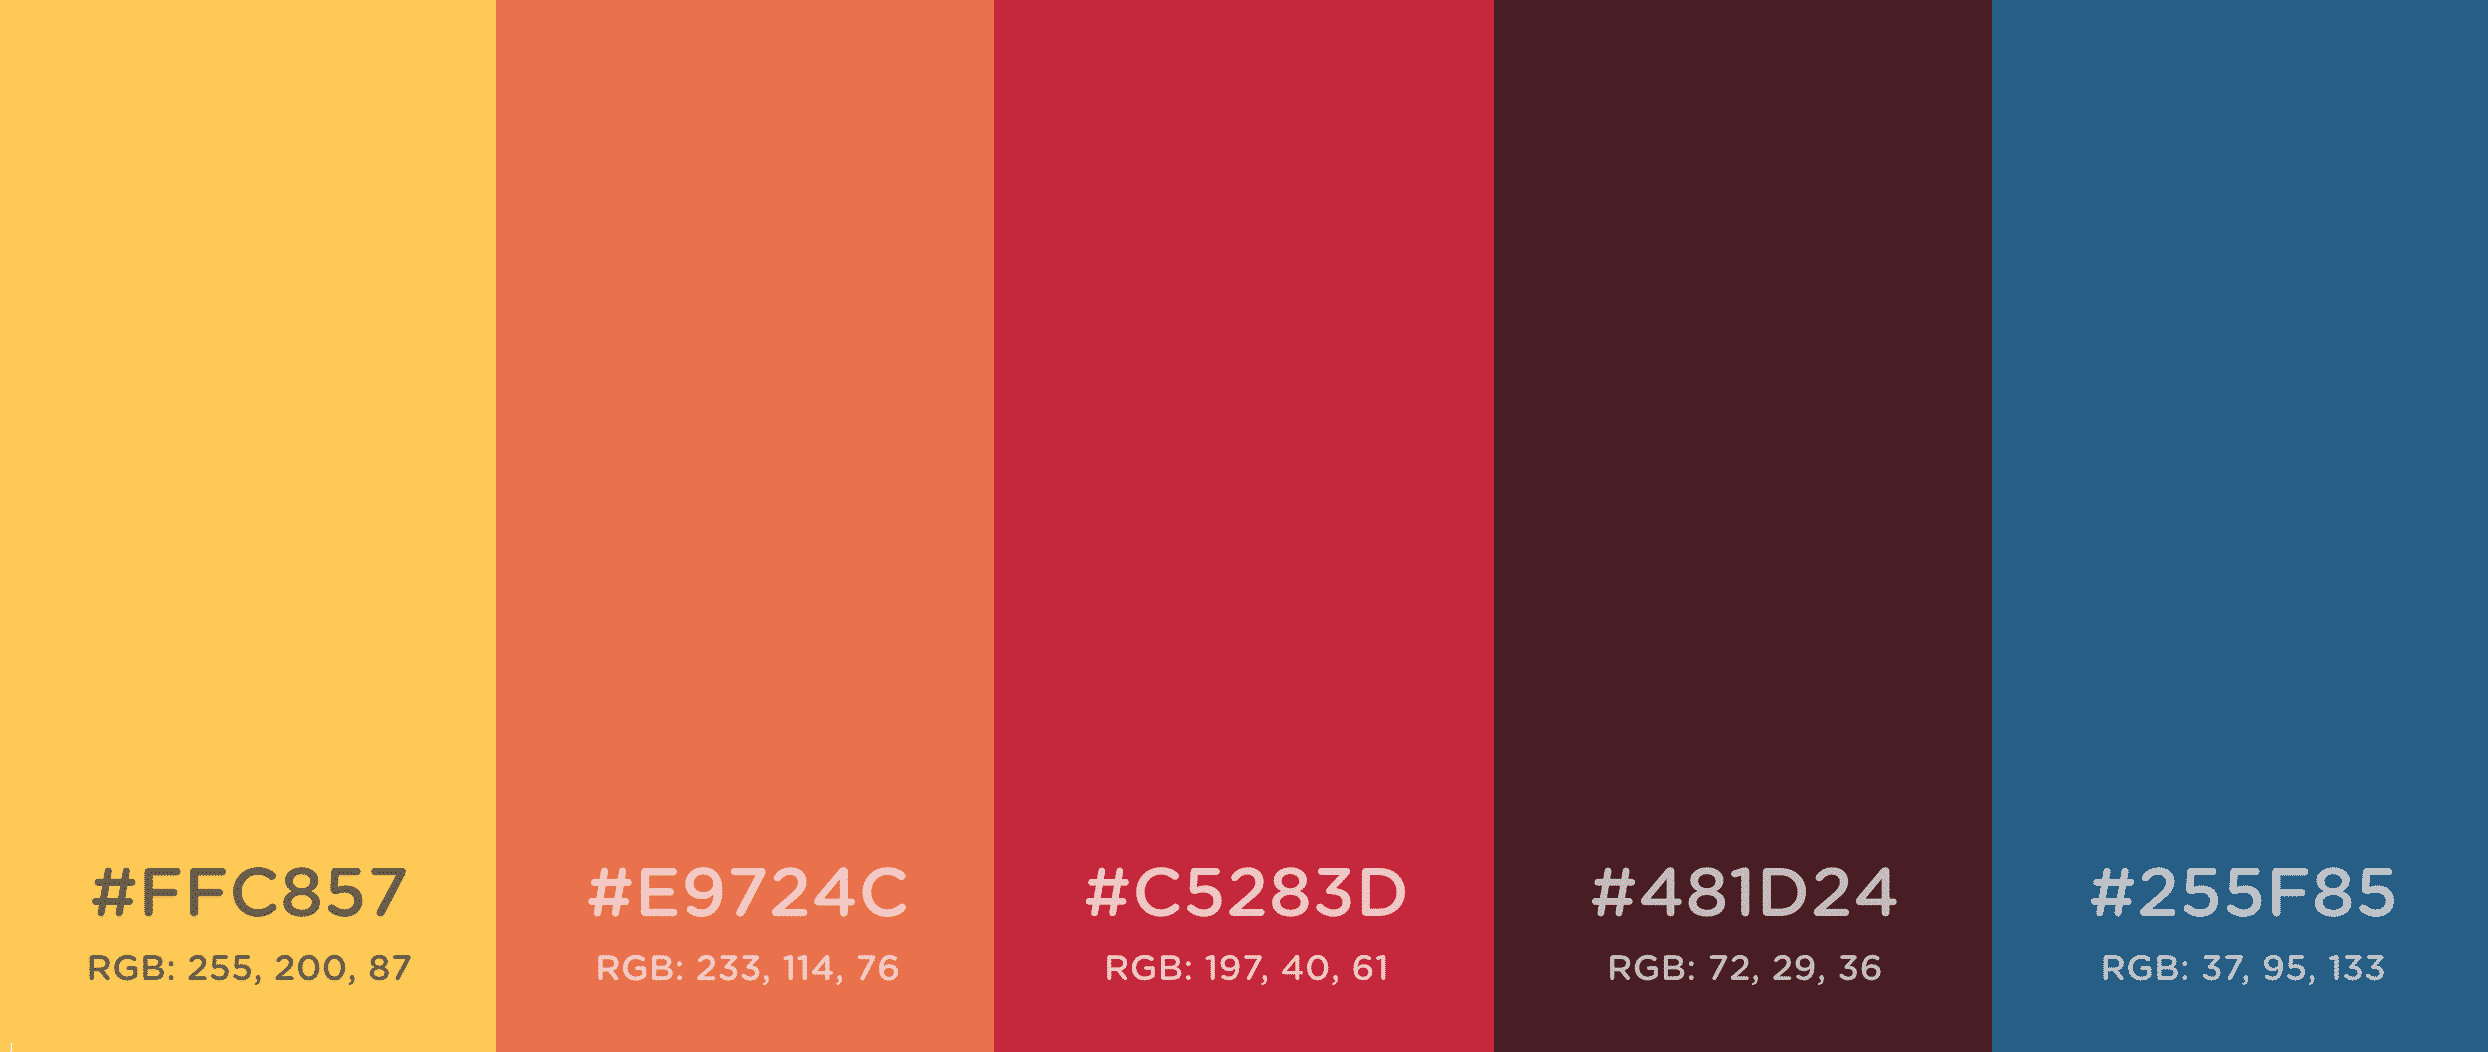 Hex colors and their RGB numbers